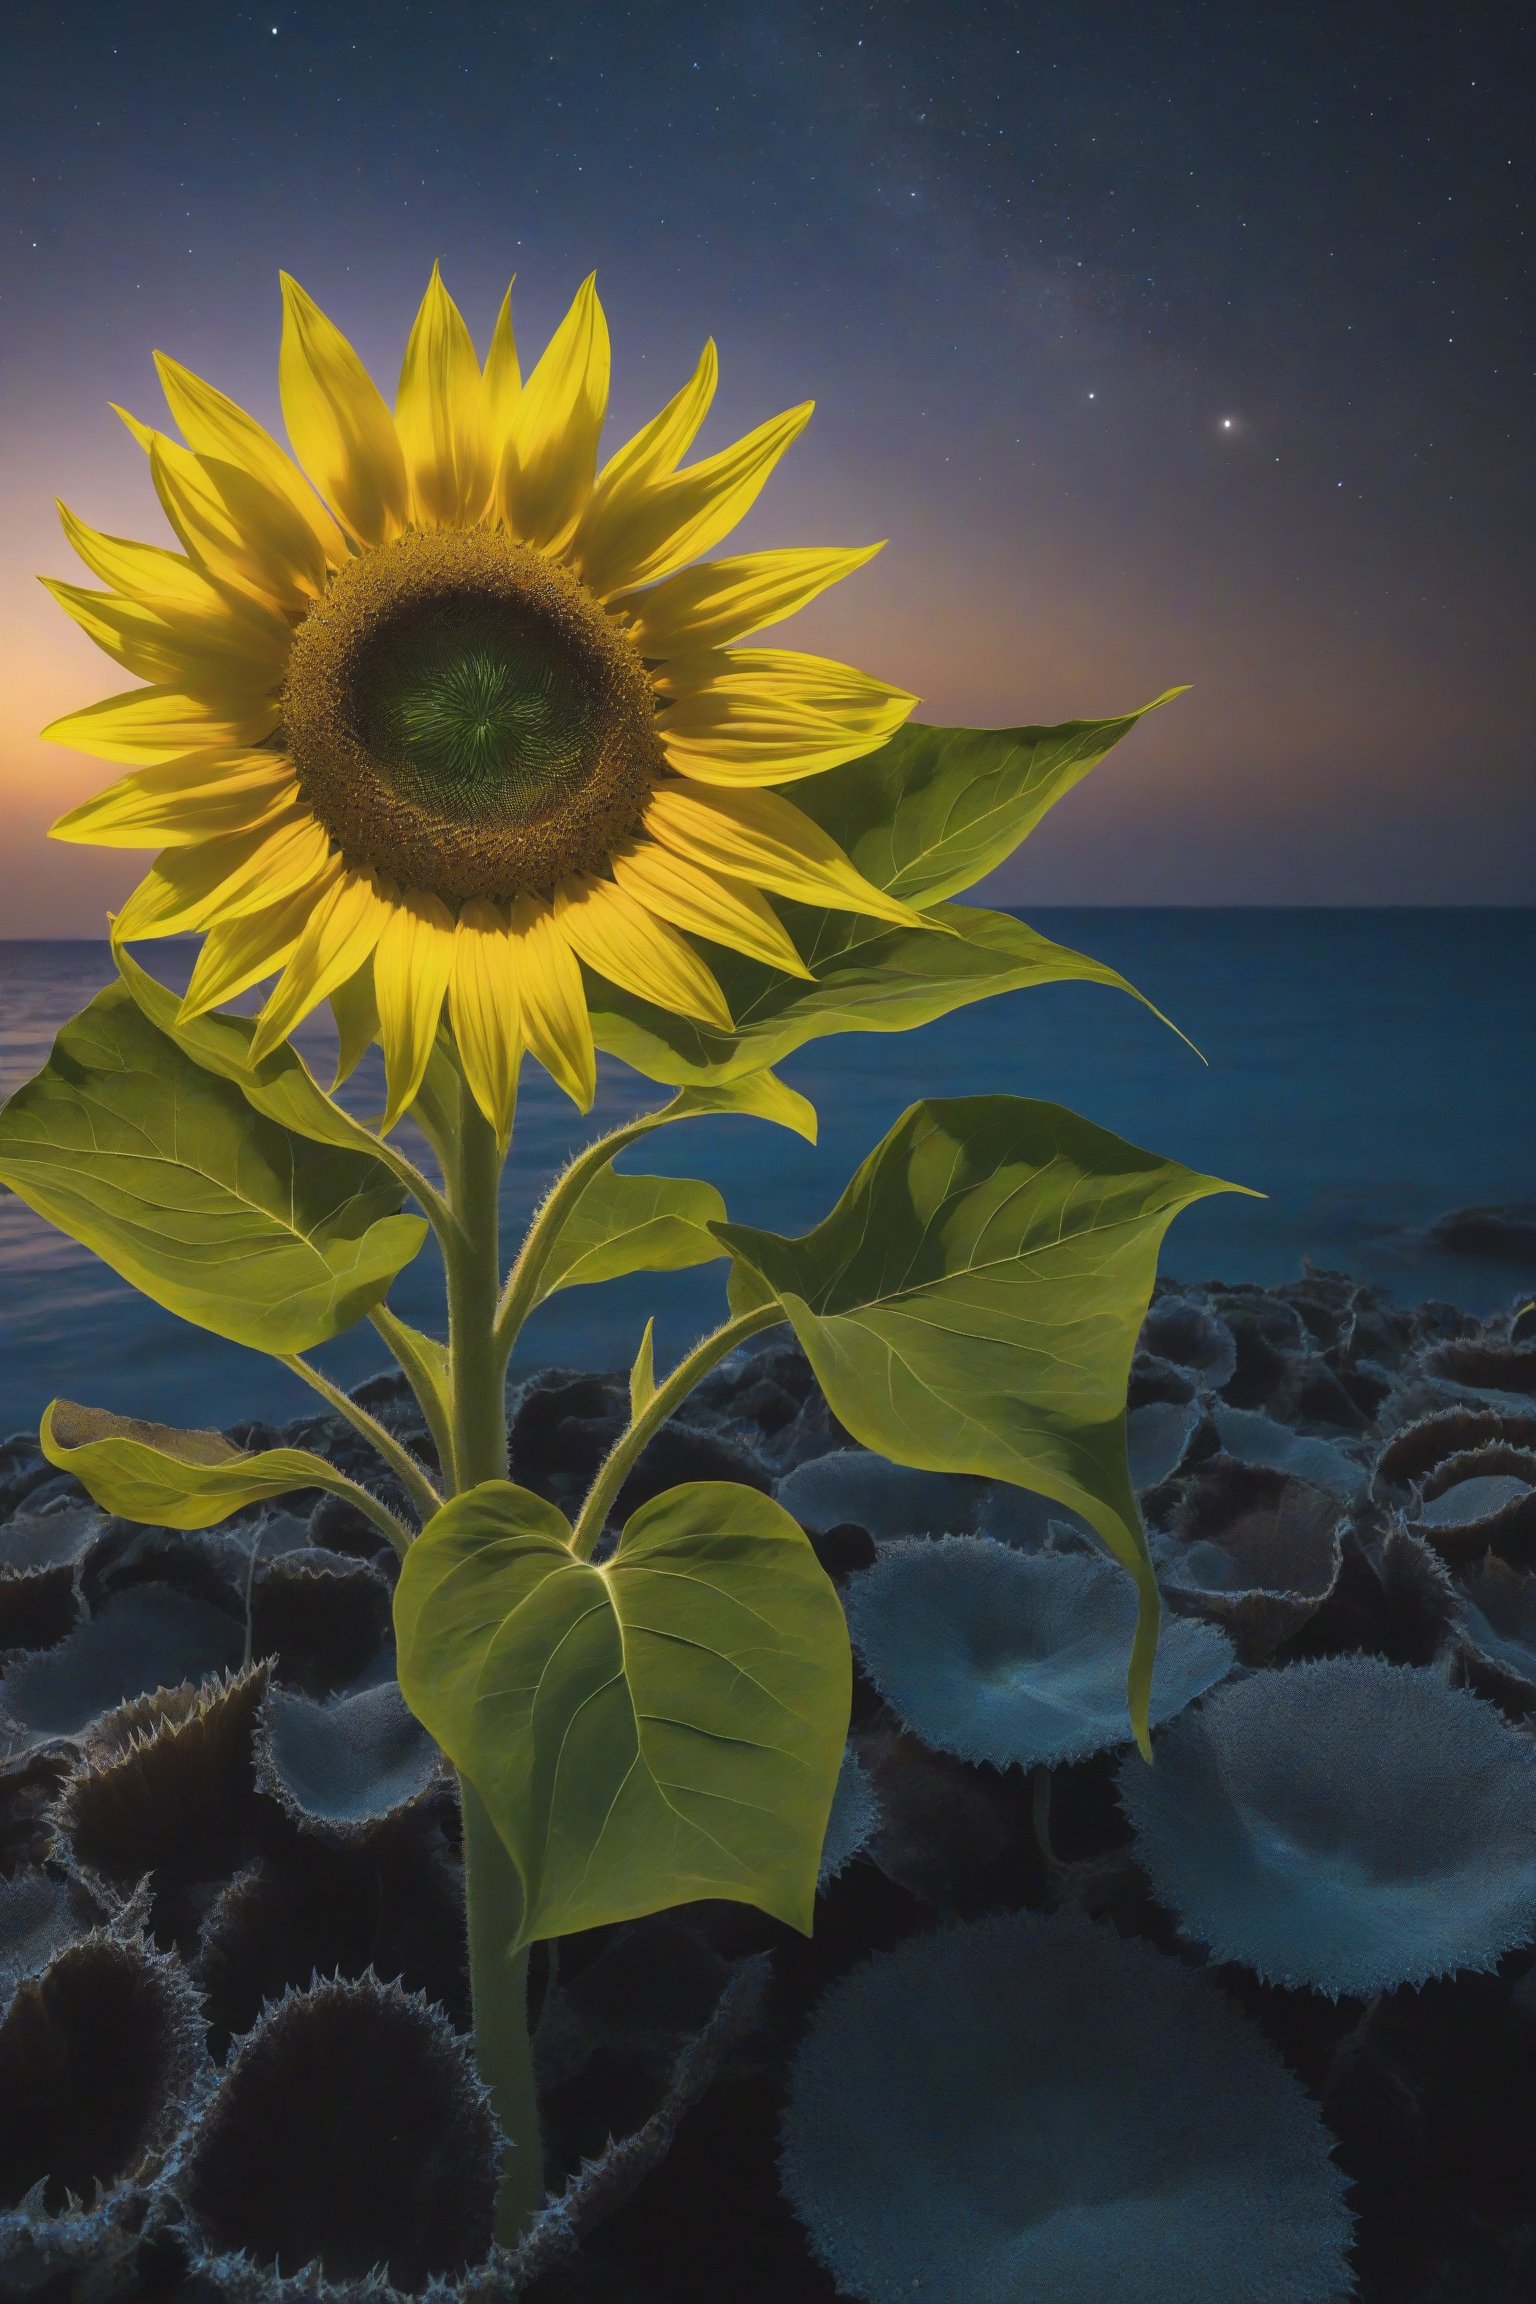 Lunar Sunflower of the Endless Night: Slowly turning towards the moonlight, this sea sunflower radiates a silvery glow that illuminates the seabed during endless nights.